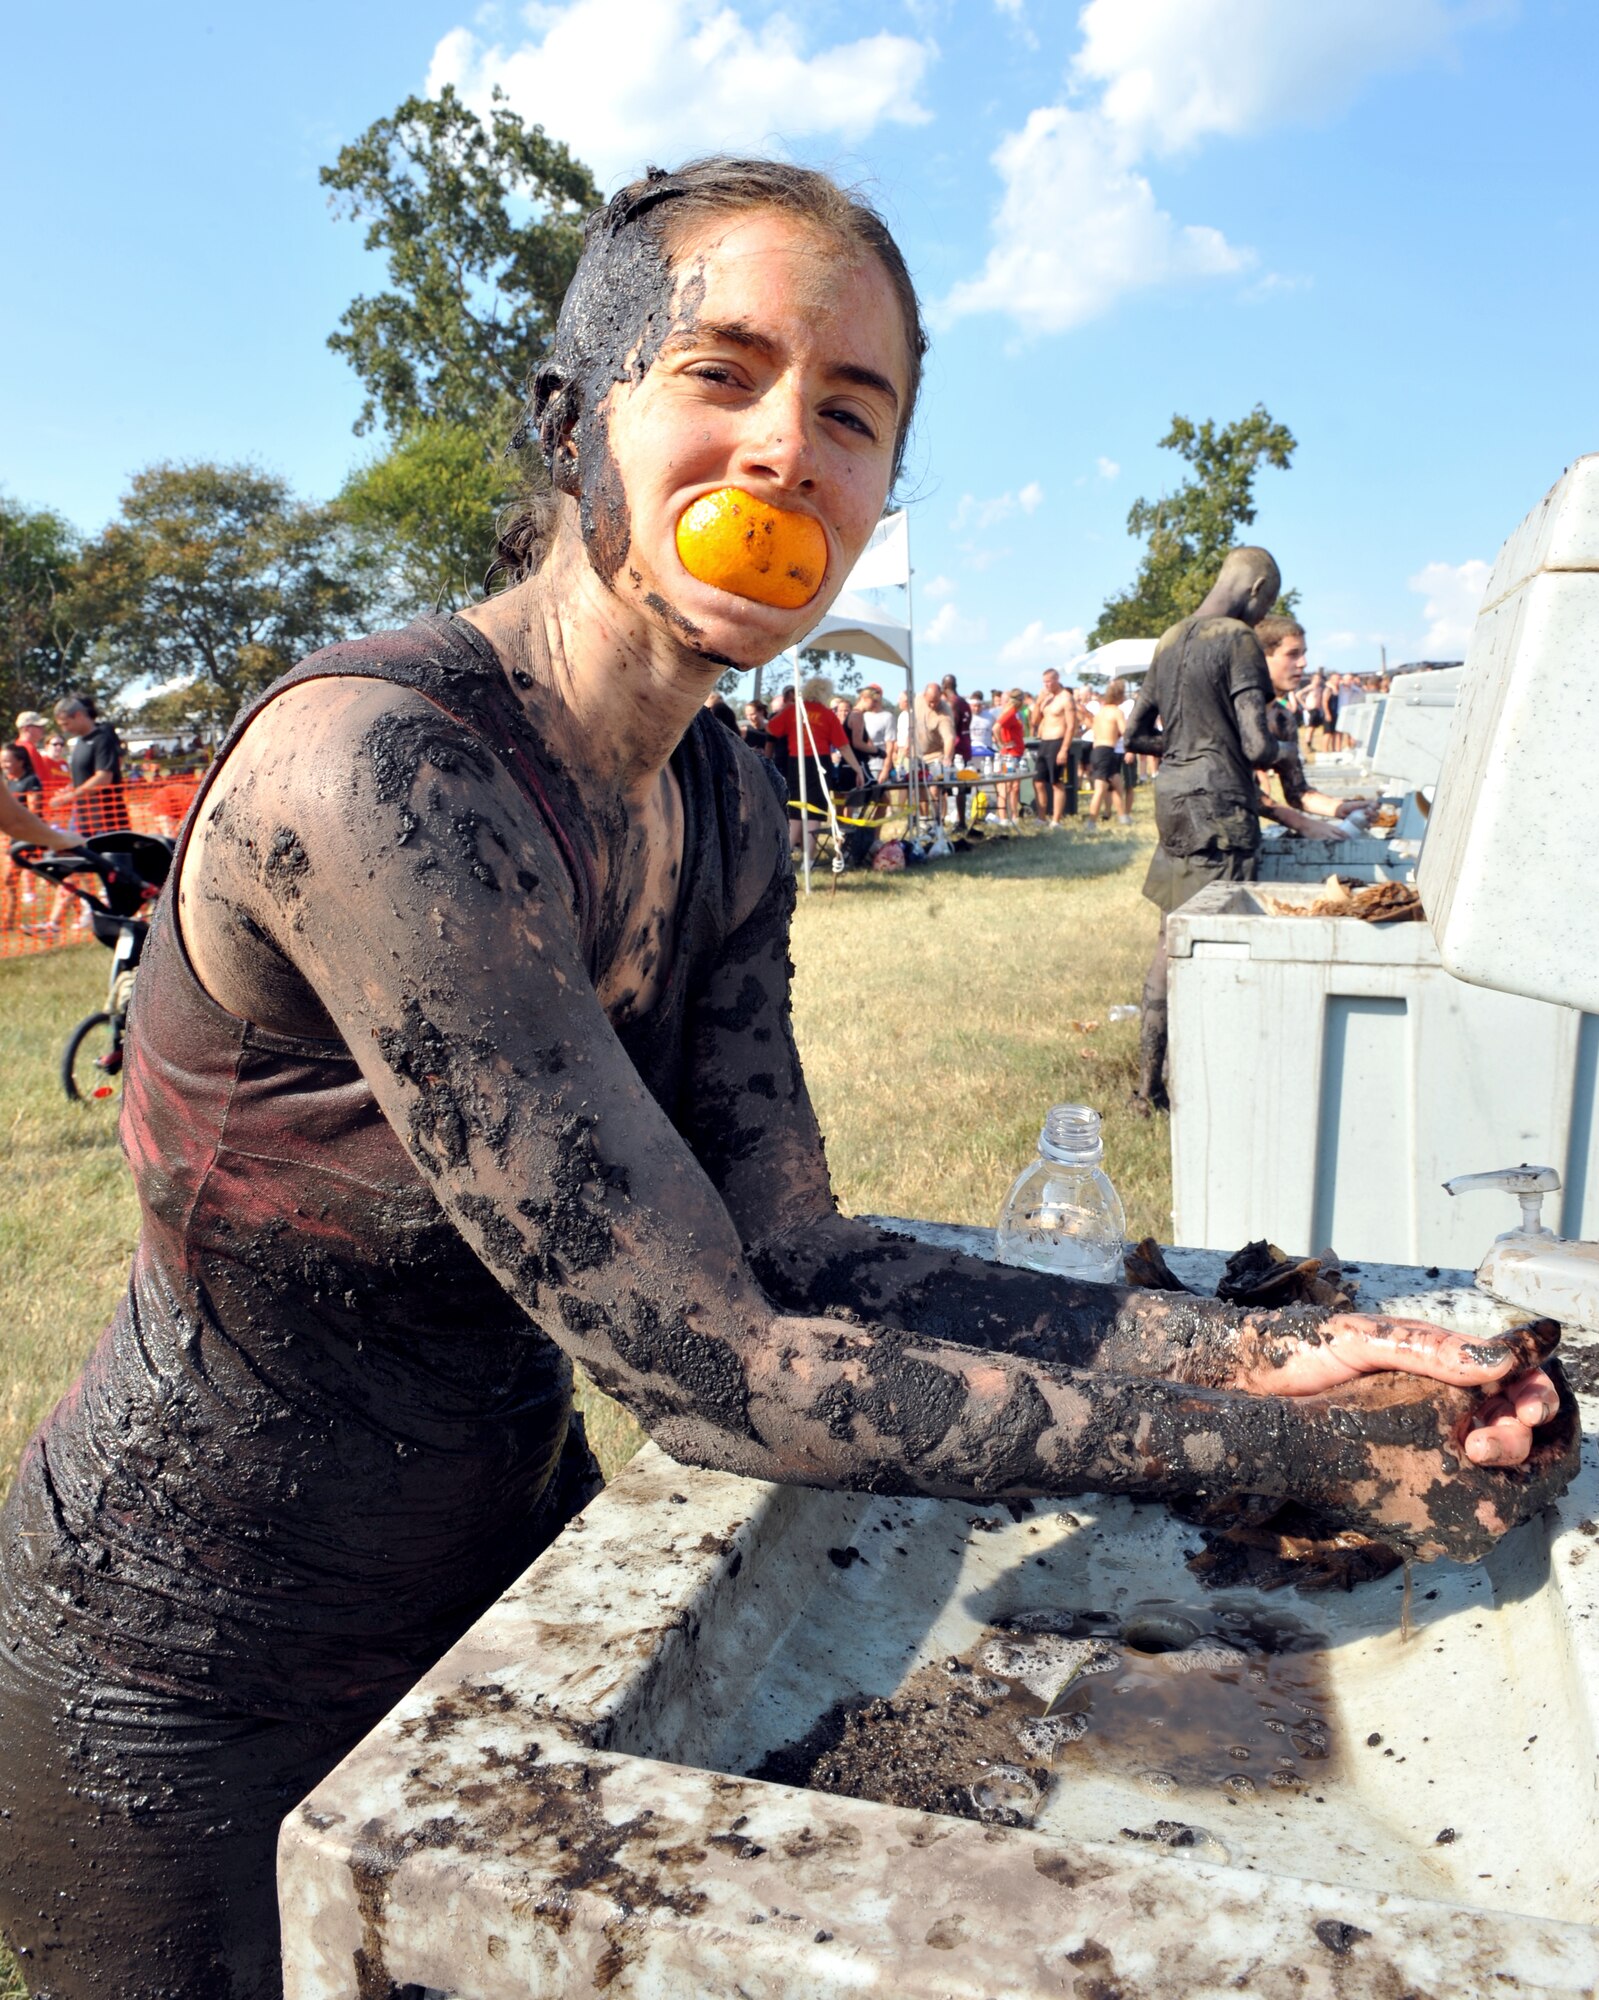 100925-F-4406D-138 SHAW AIR FORCE BASE, S.C.- After finishing the race a contestant washes her hands and poses at the 17th Annual United States Marine Corps Mud Run in Gaston, S.C., Sept. 25, 2010. The USMC Mud Run is held annually to raise money for marines and their families who have been killed on duty. Its profits also go towards scholarships and local events which promote the Marine Corps in the community. (U.S. Air Force photo/Airman 1st Class Tabatha L. Duarte (Released)